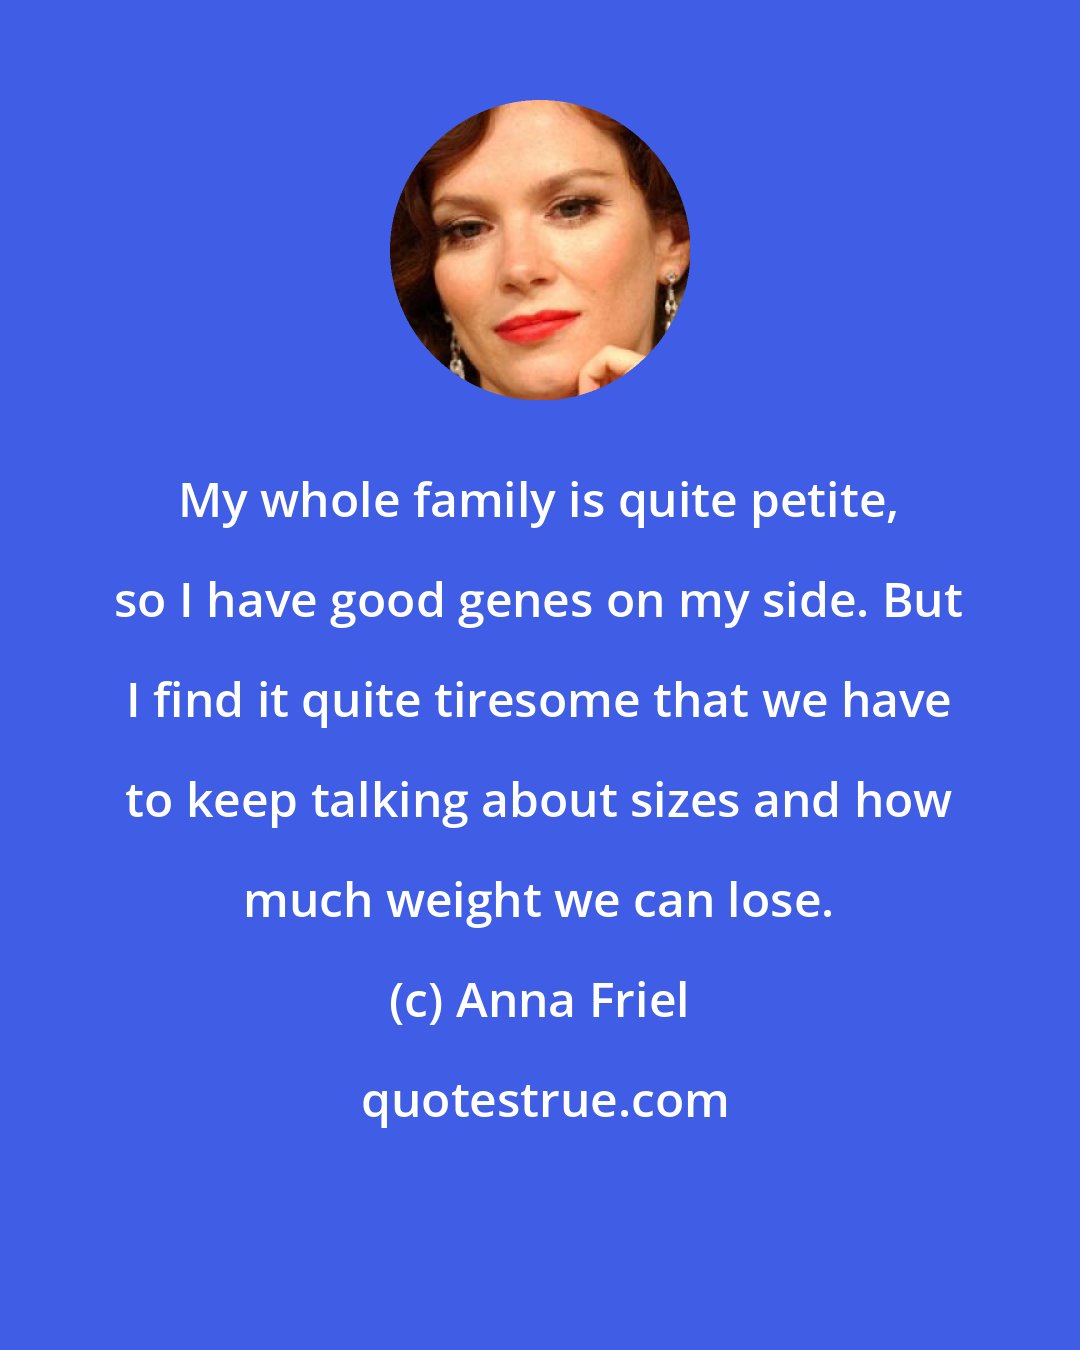 Anna Friel: My whole family is quite petite, so I have good genes on my side. But I find it quite tiresome that we have to keep talking about sizes and how much weight we can lose.